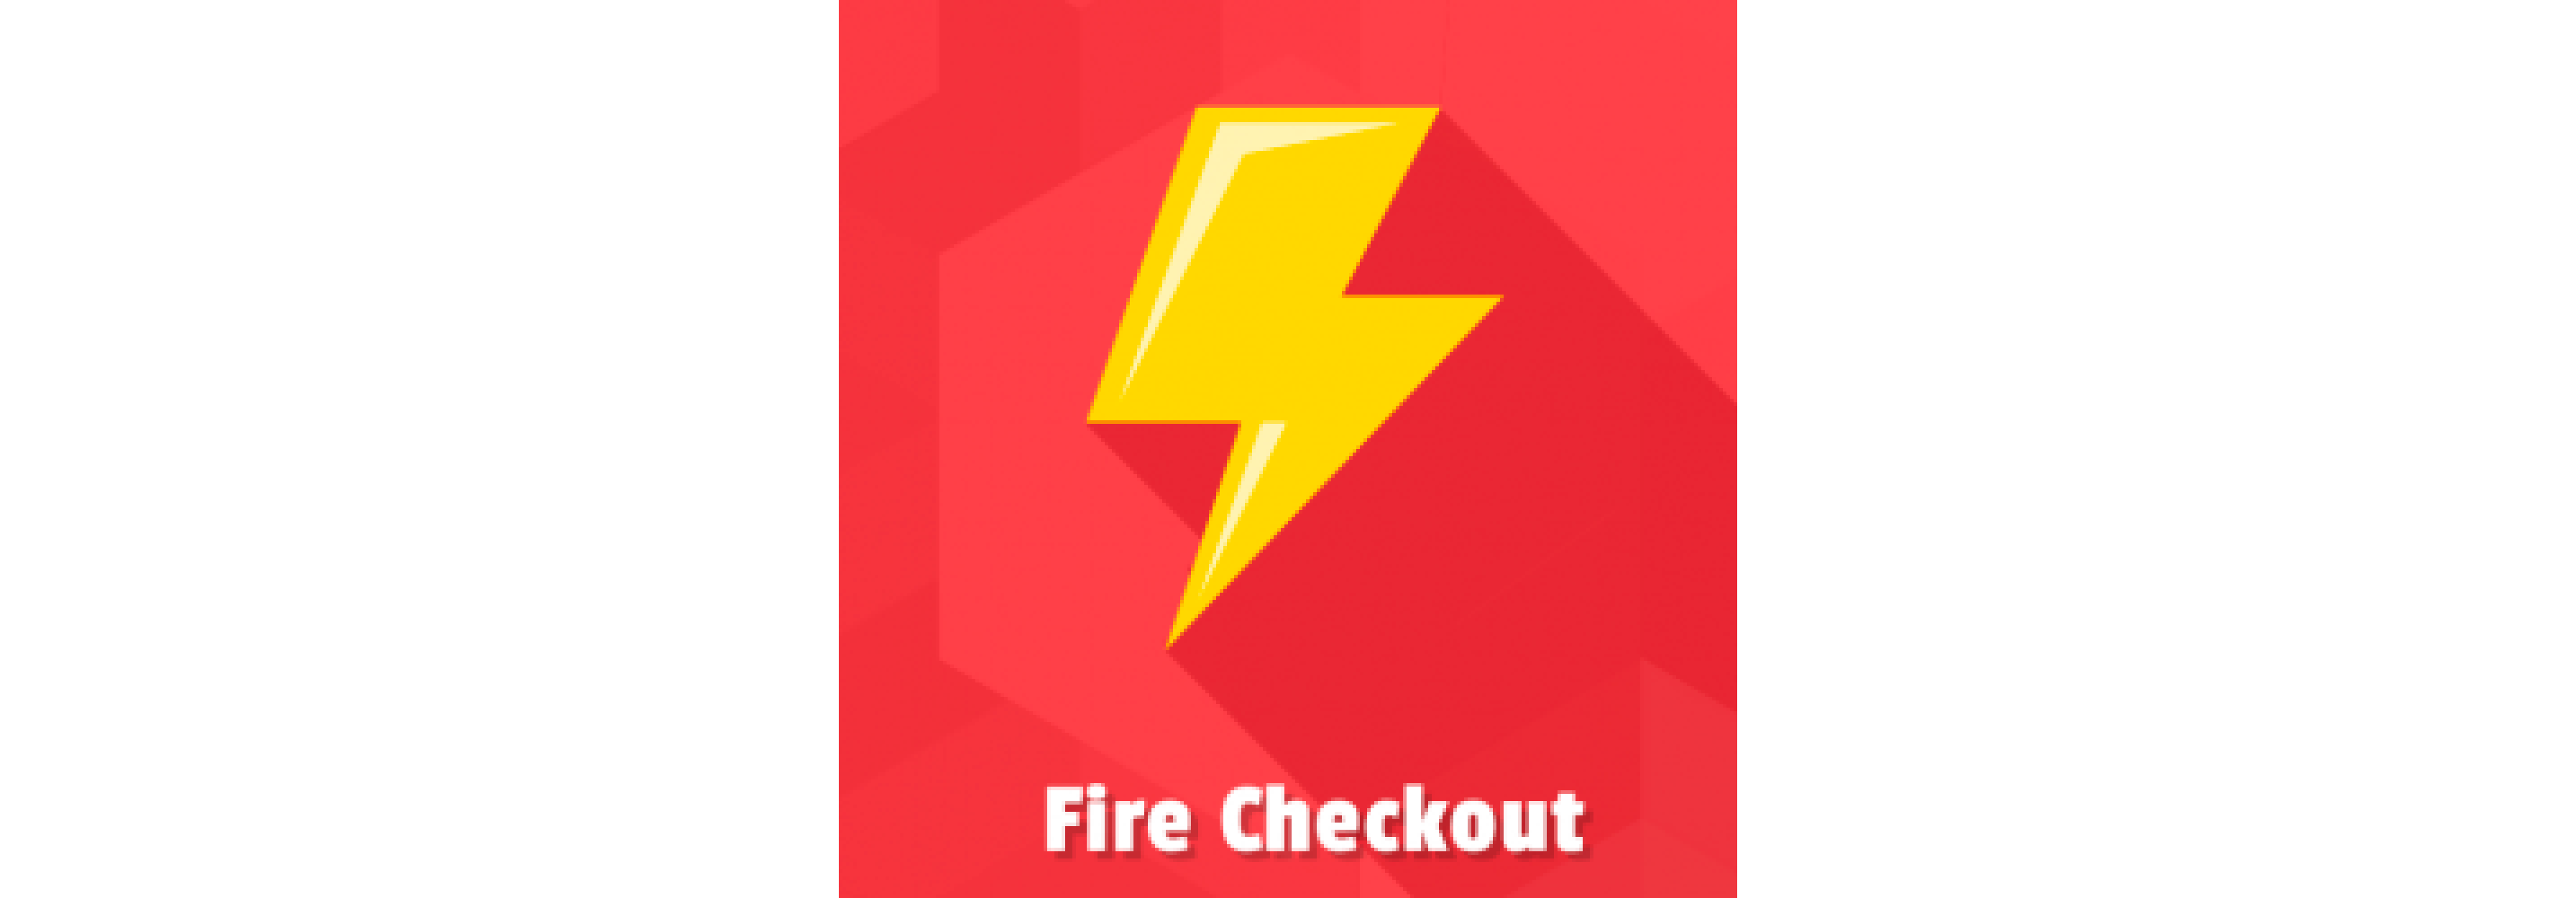 Fire Checkout by Templates Master to boost Magento e-commerce conversion rates